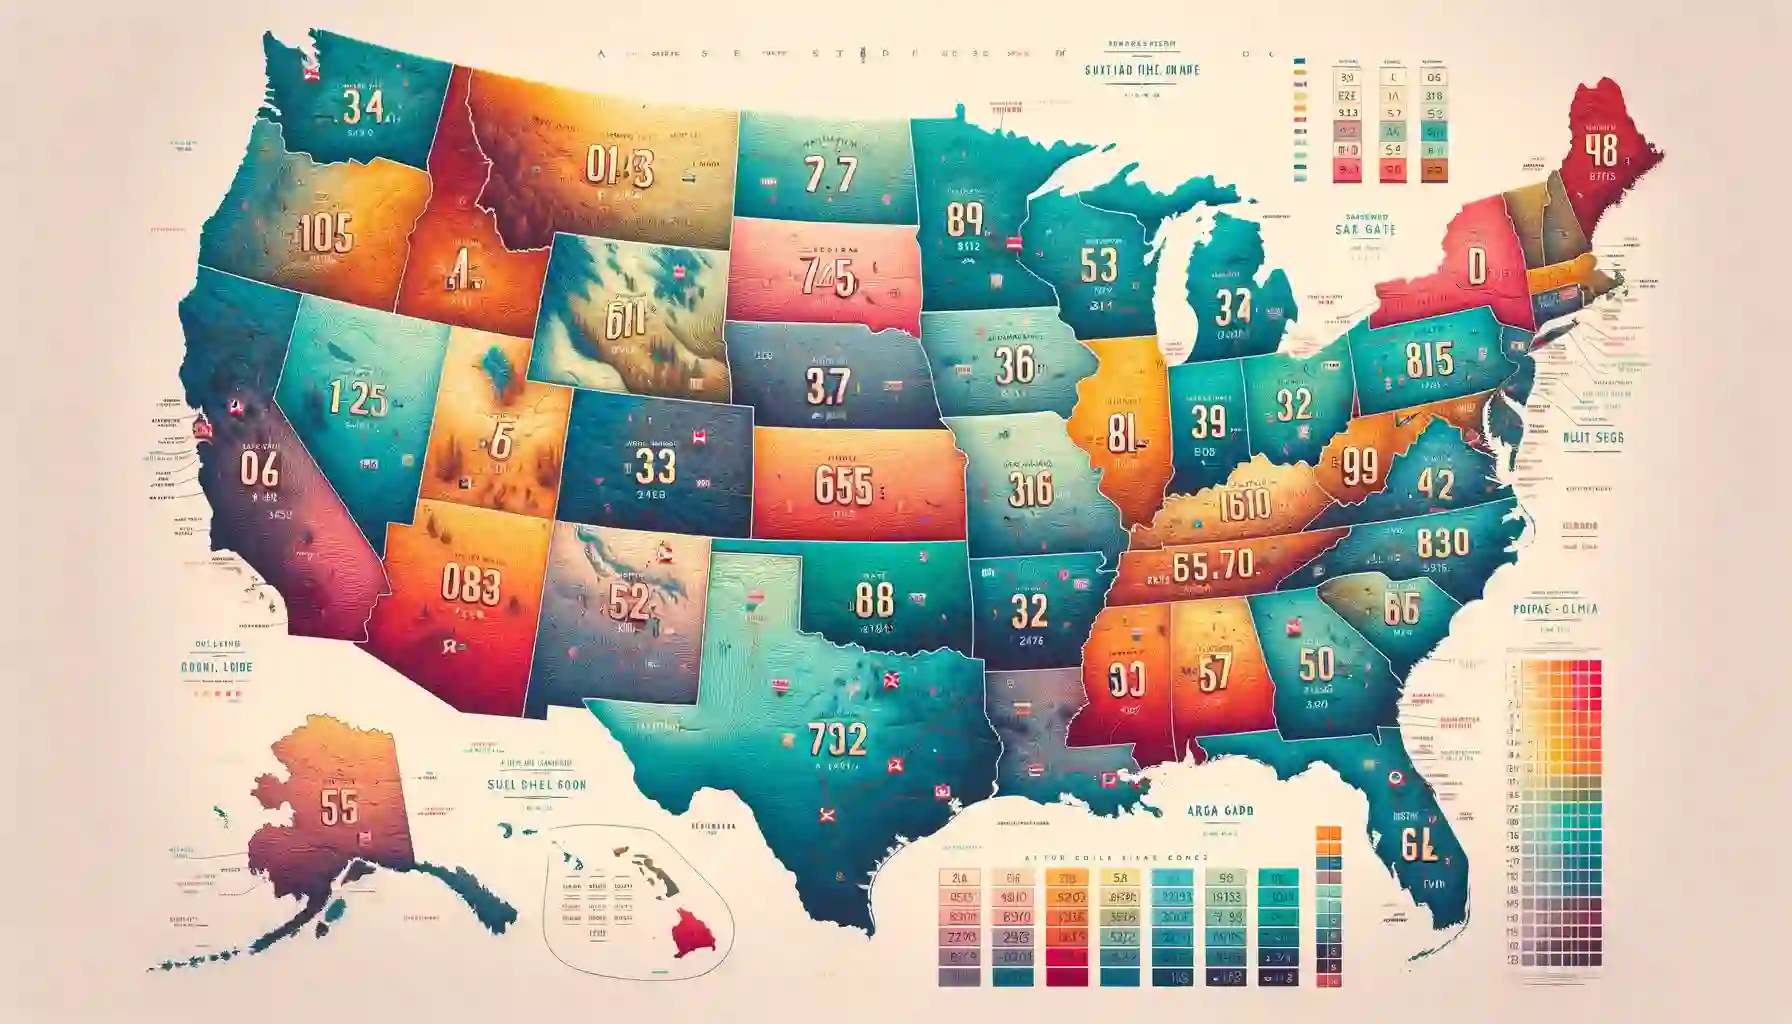 Area codes in the United States